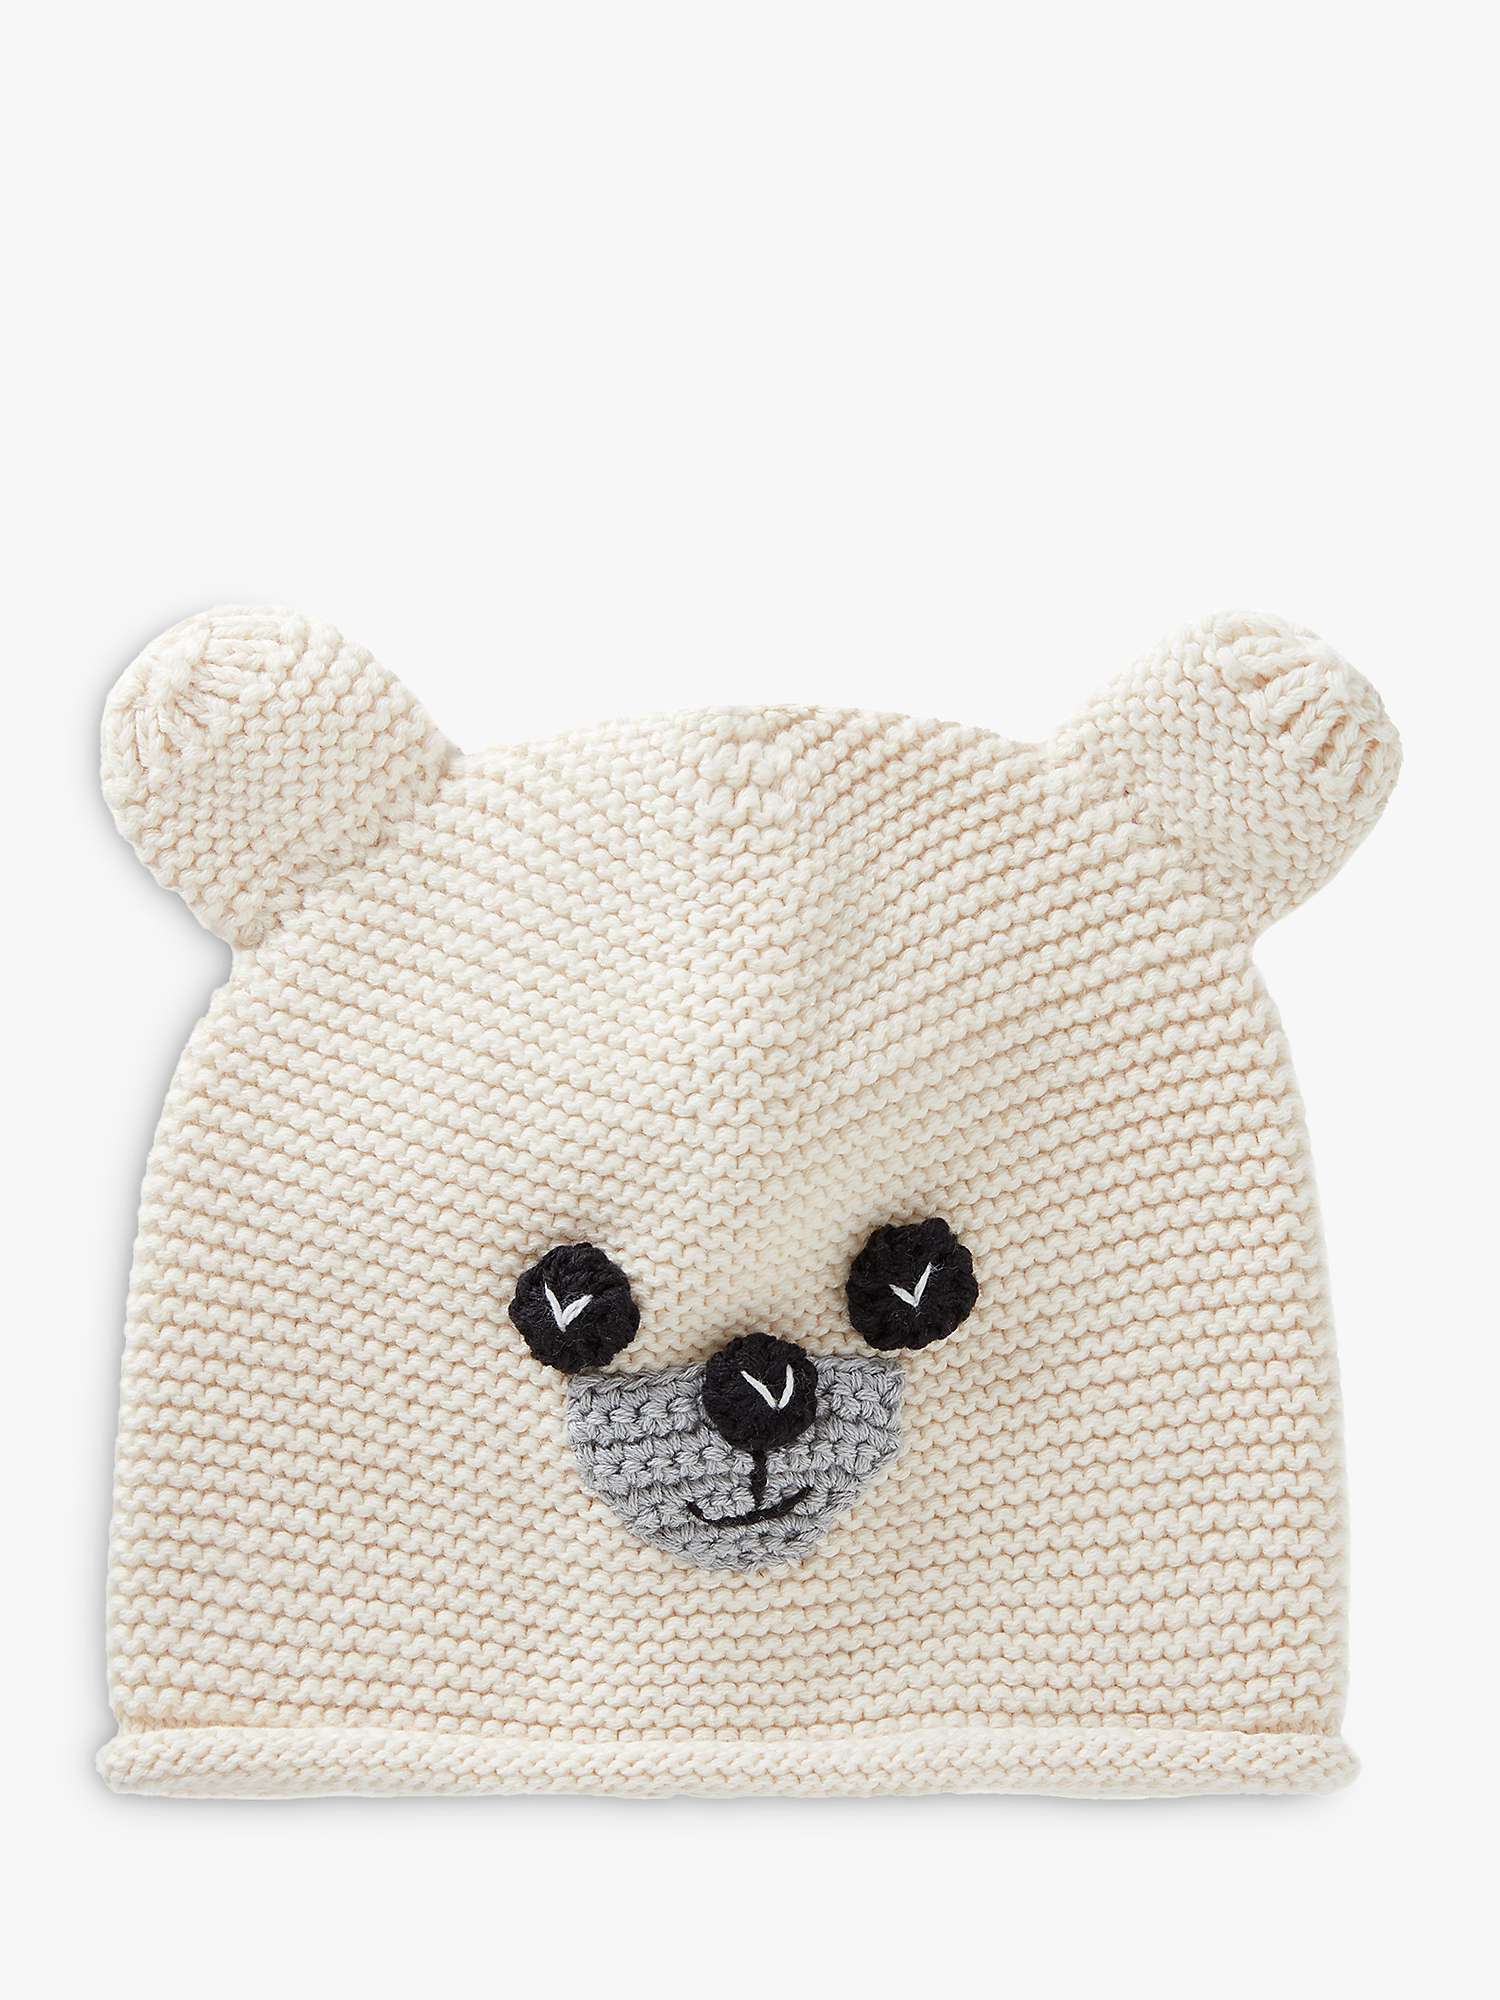 Buy Benetton Baby Tricot Animal Face Knit Hat Online at johnlewis.com